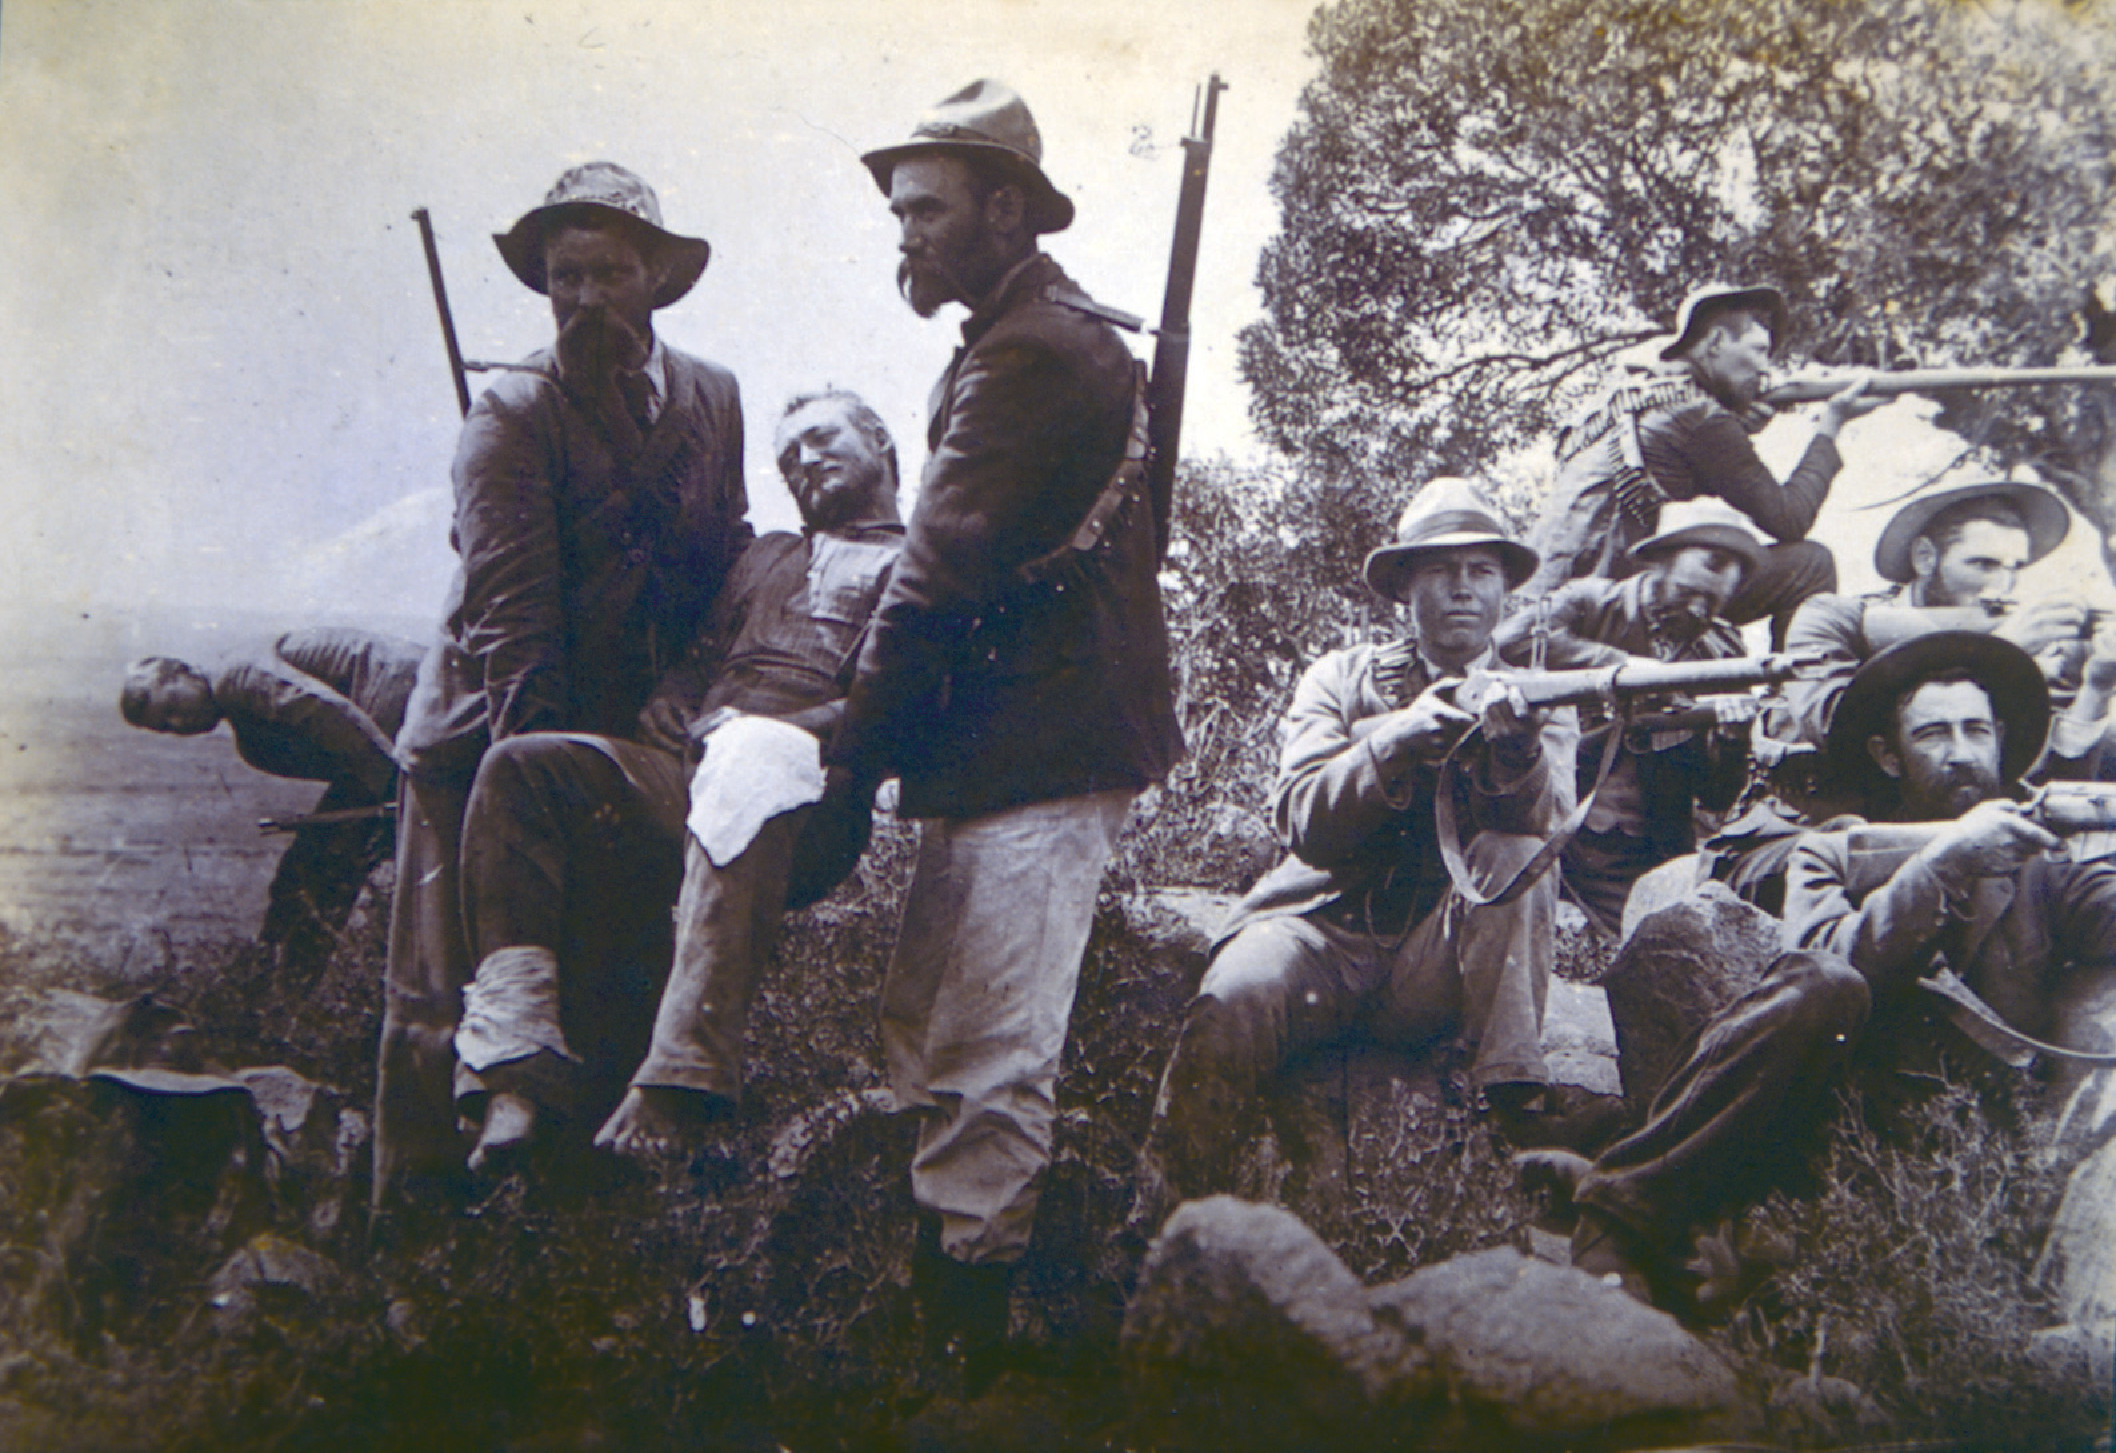 A badly wounded Boer is carried out of danger as his comrades keep watch with their Mausers. 